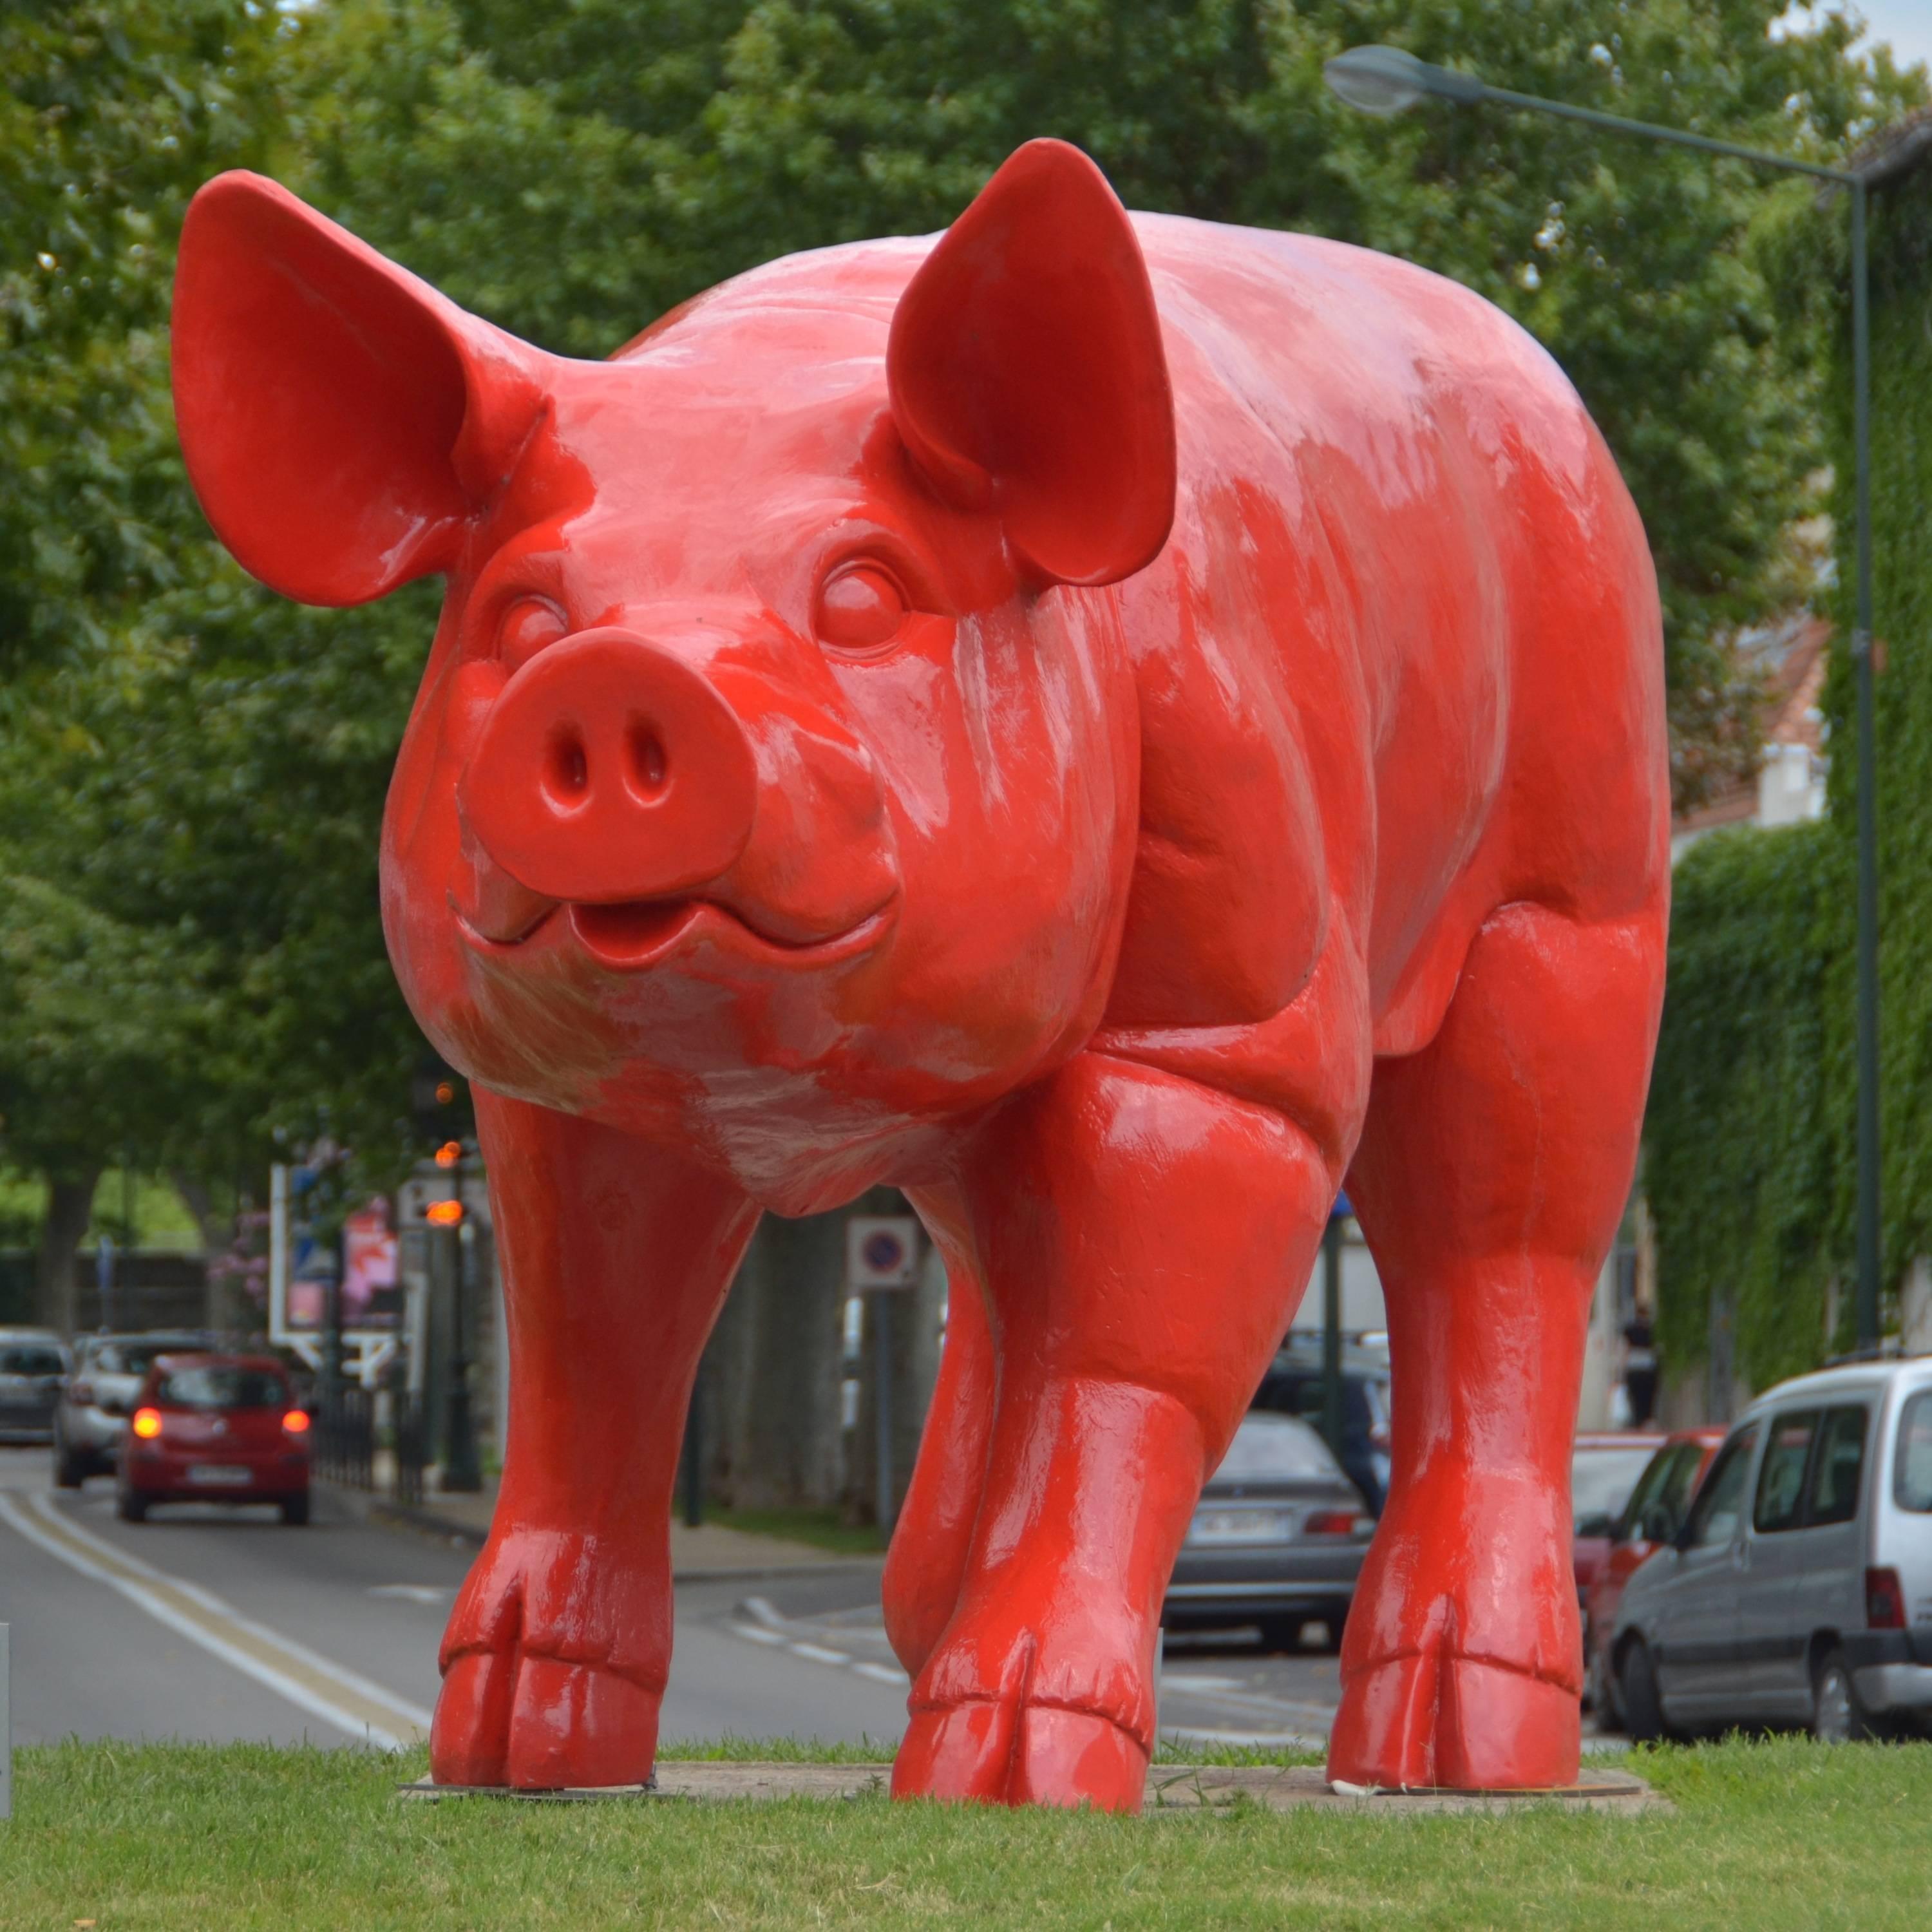 Cloned giant Pig